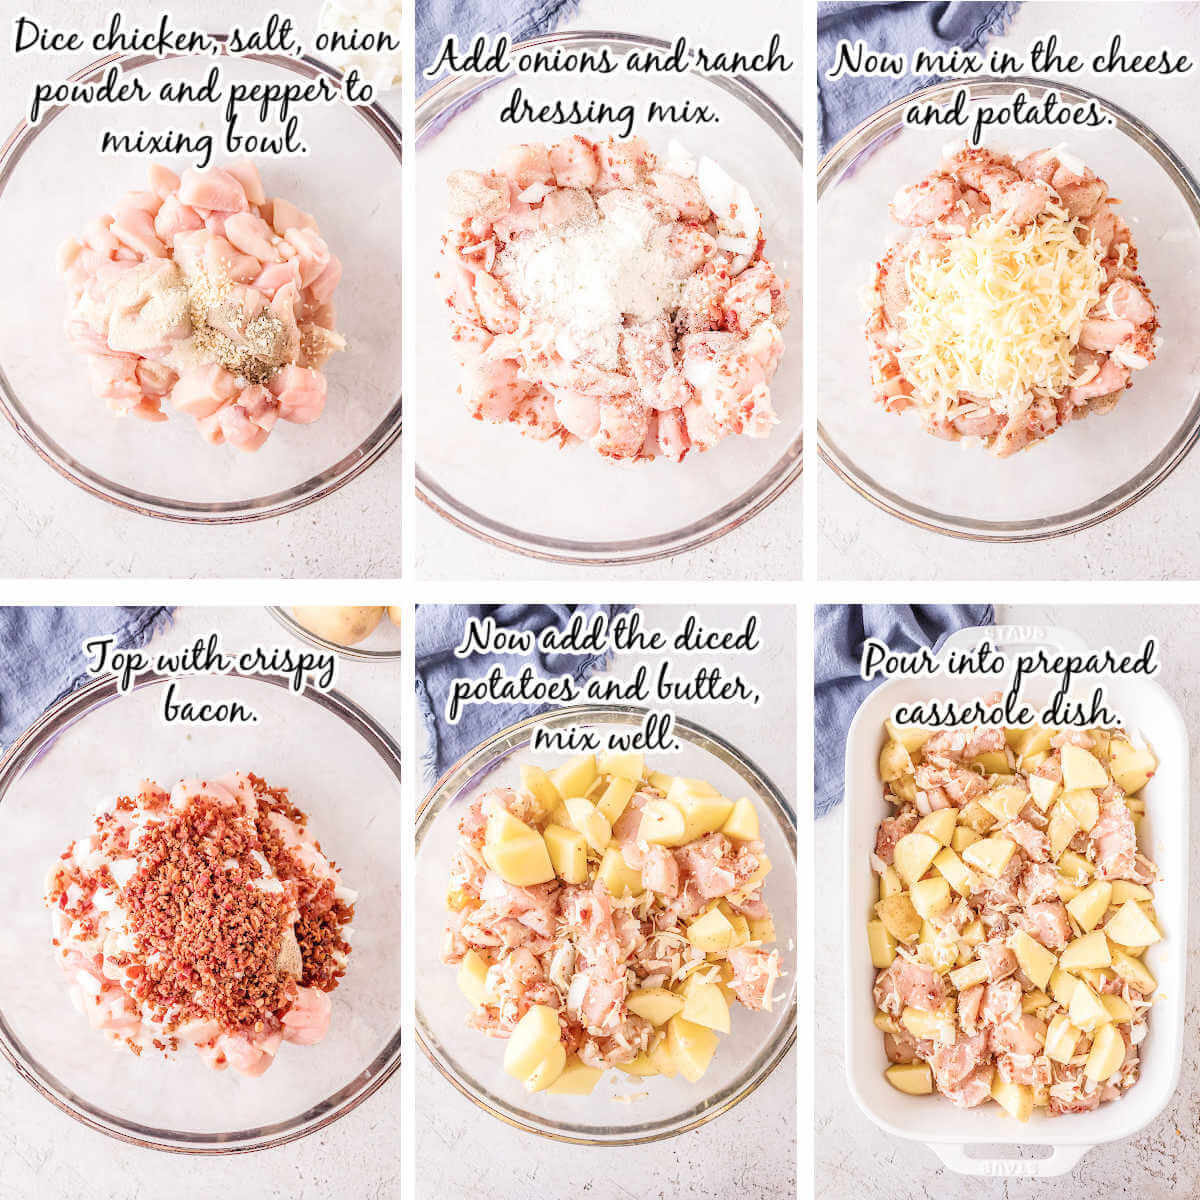 Step by step instructions to make Chicken Bacon Ranch Potato Bake with print overlay.